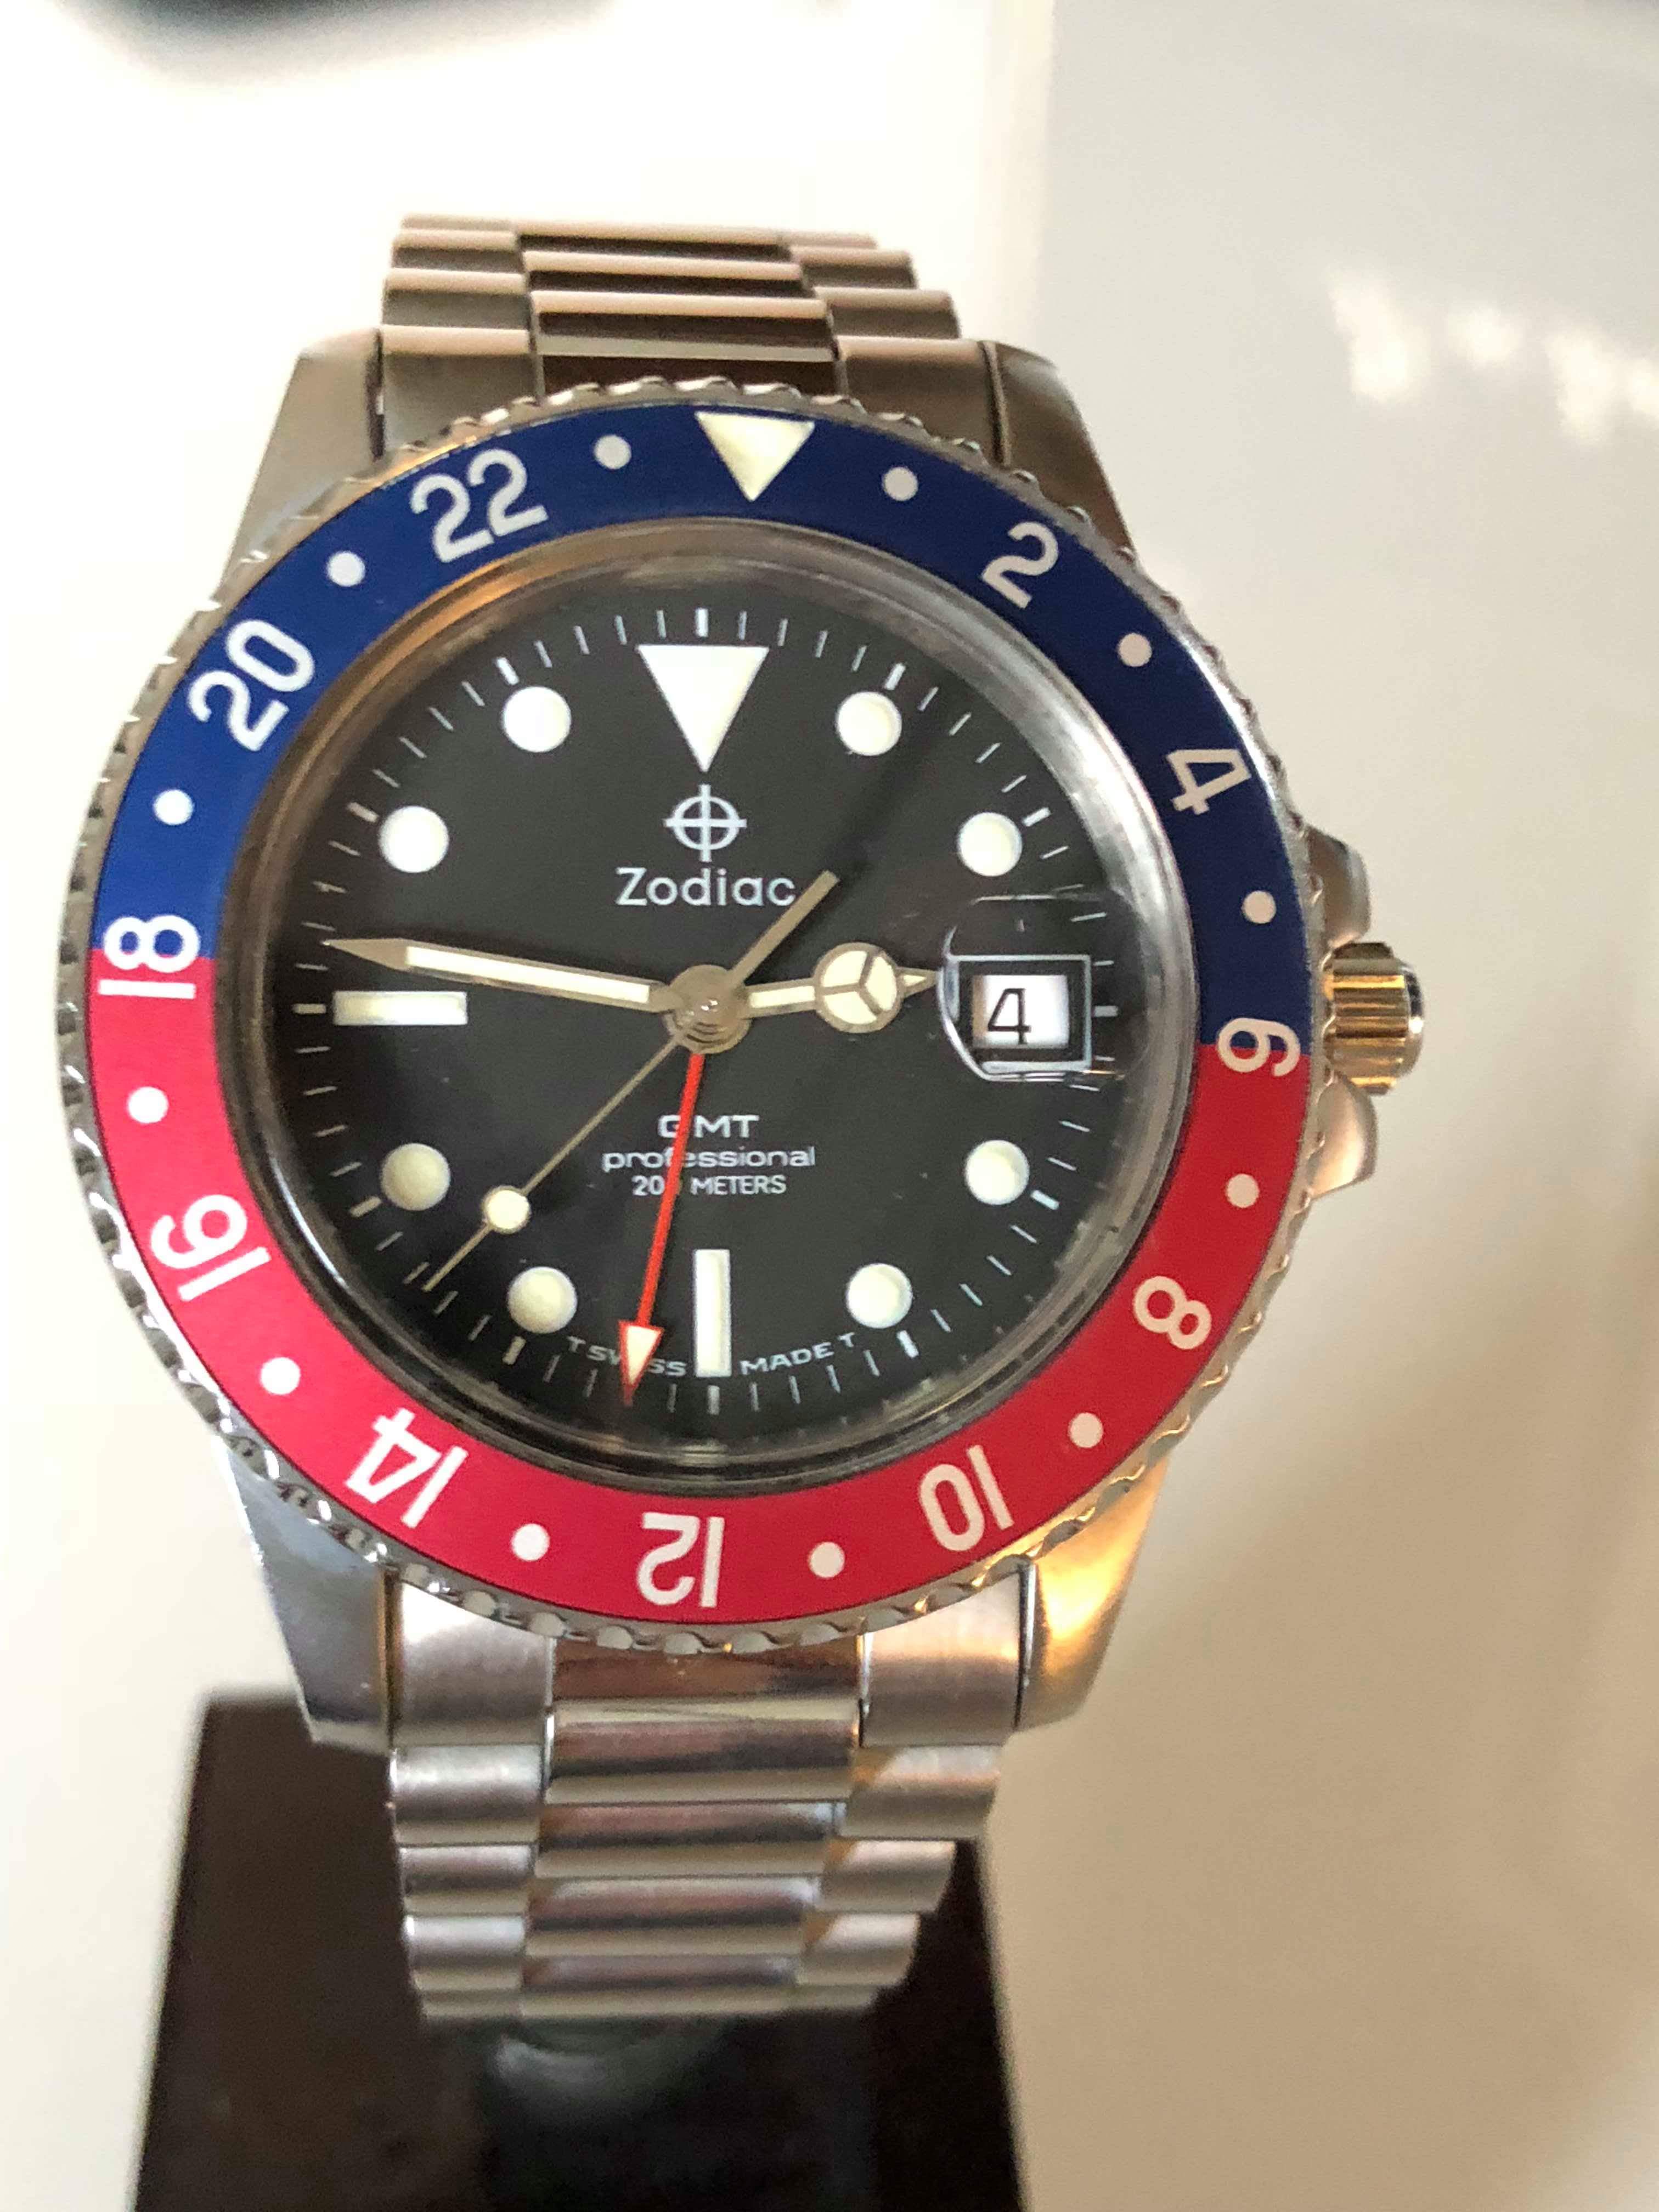 Zodiac GMT professional 200MATERS ゾディアック プロフェッショナル ...